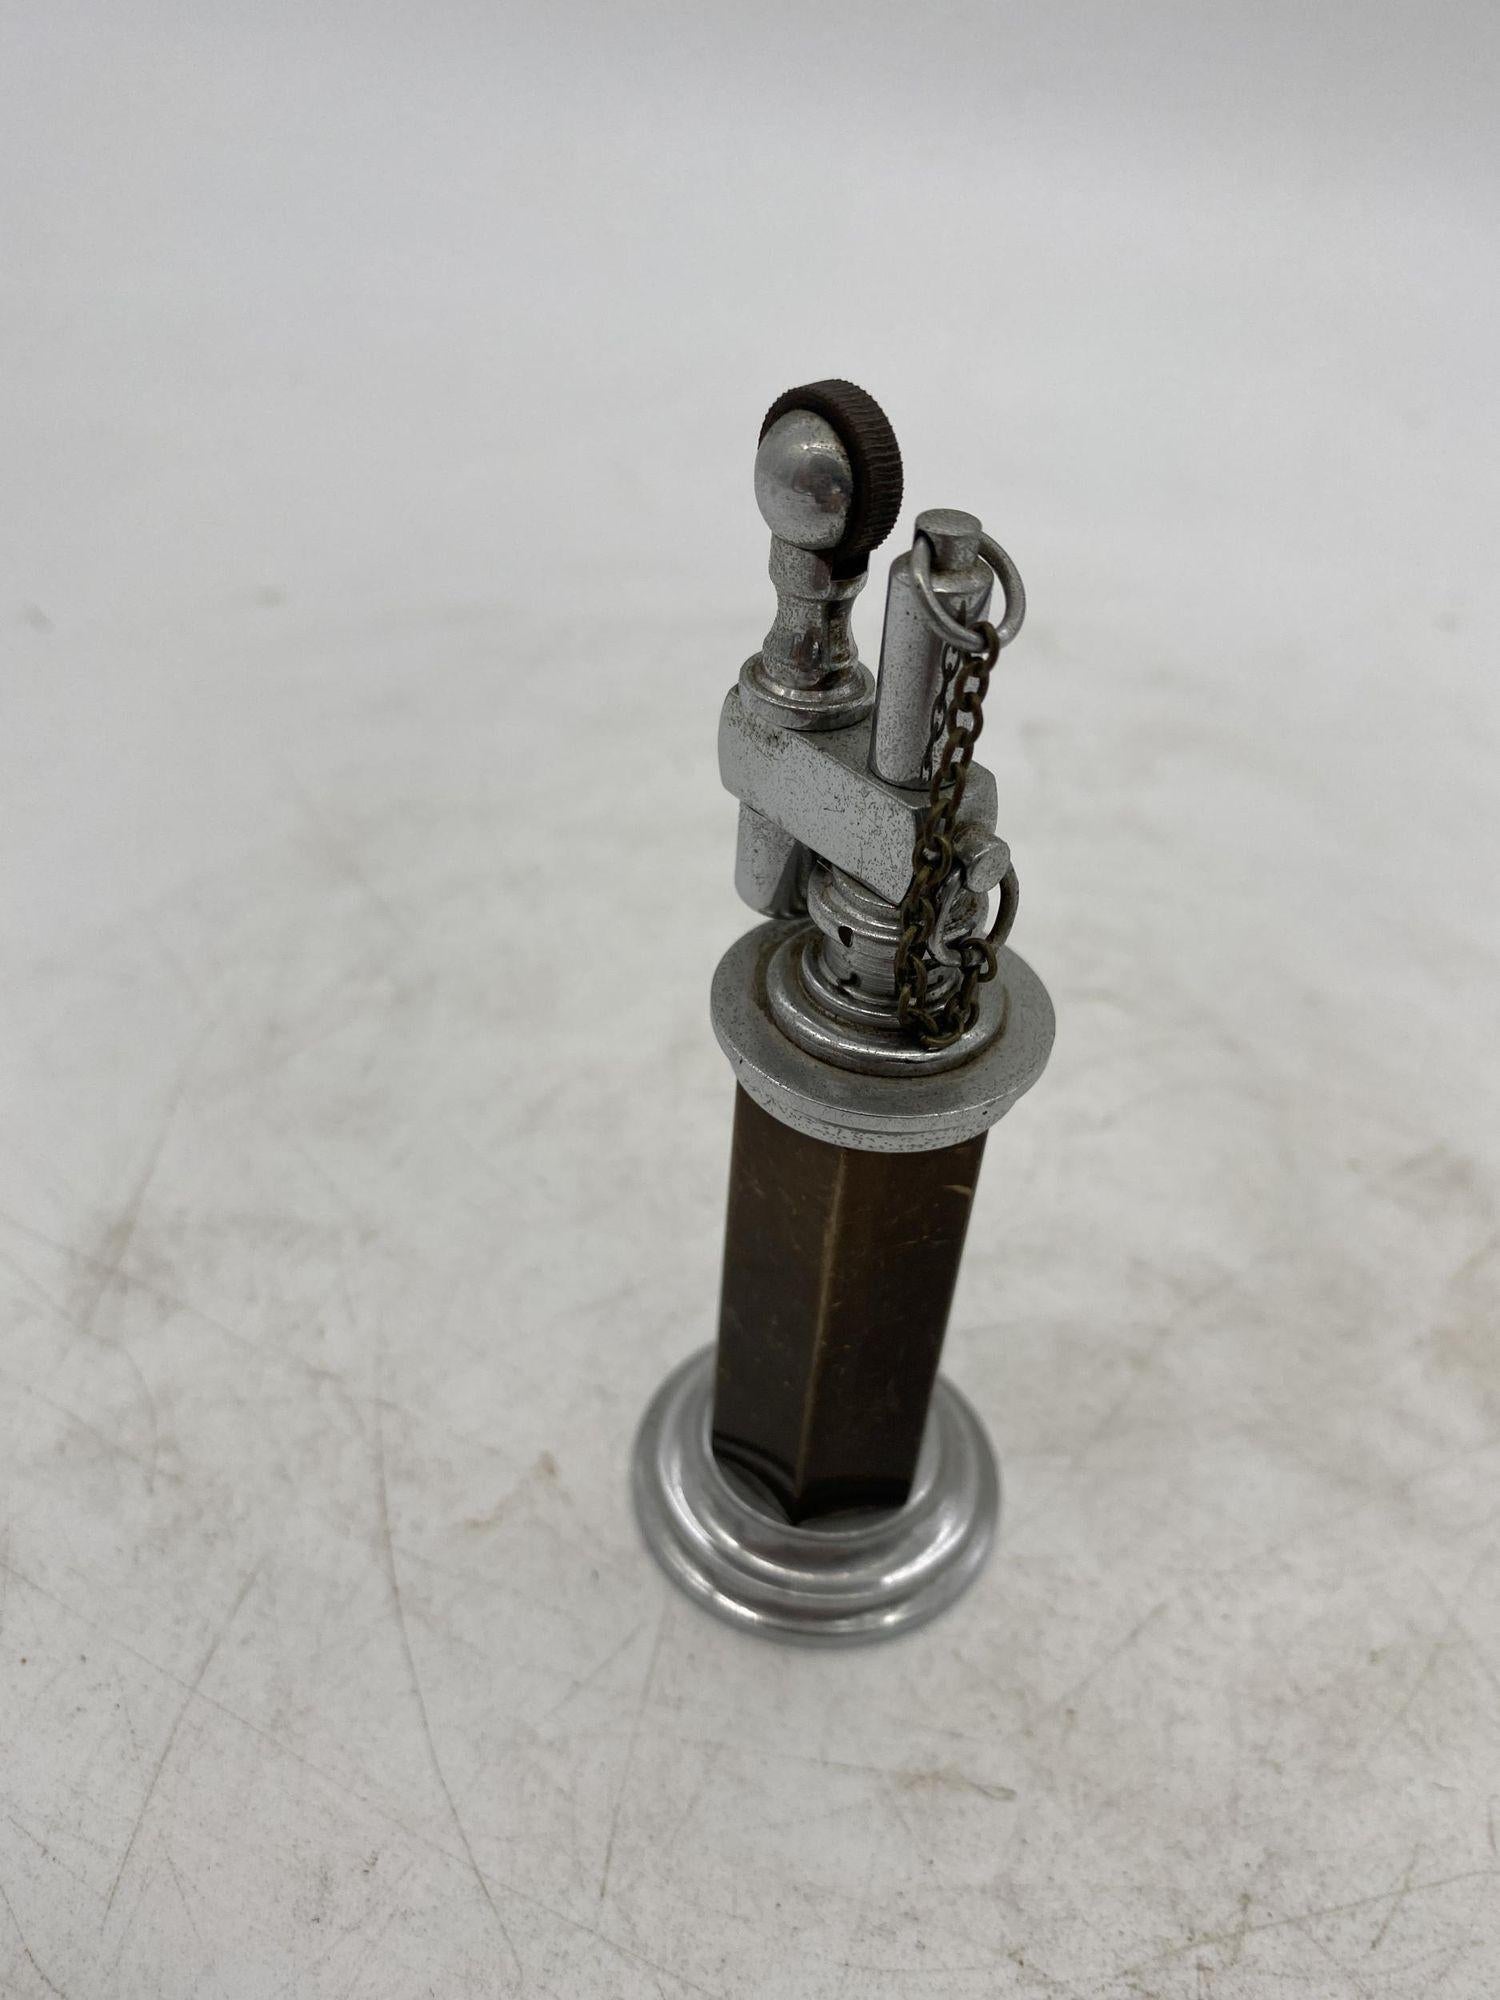 Green and silver column table petrol lighter with chain cap by Daltis New York City.

Measures: 5.5